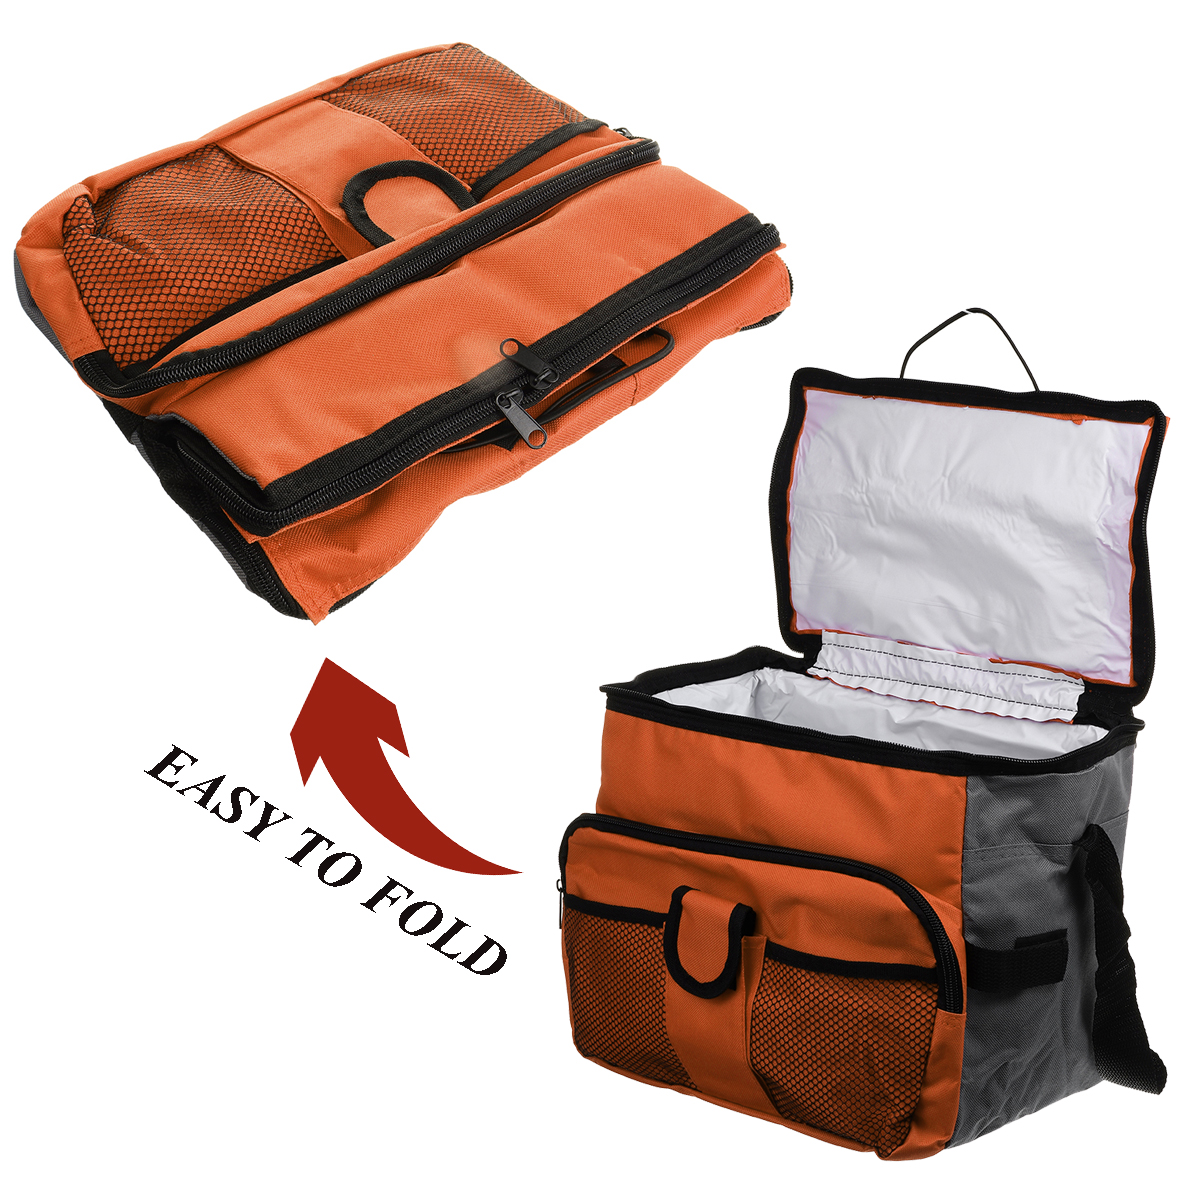 3L-Insulated-Lunch-Bag-Food-Container-Box-Bag-Food-Delivery-Bag-Waterproof-Lightweight-Grocery-Stora-1731824-3